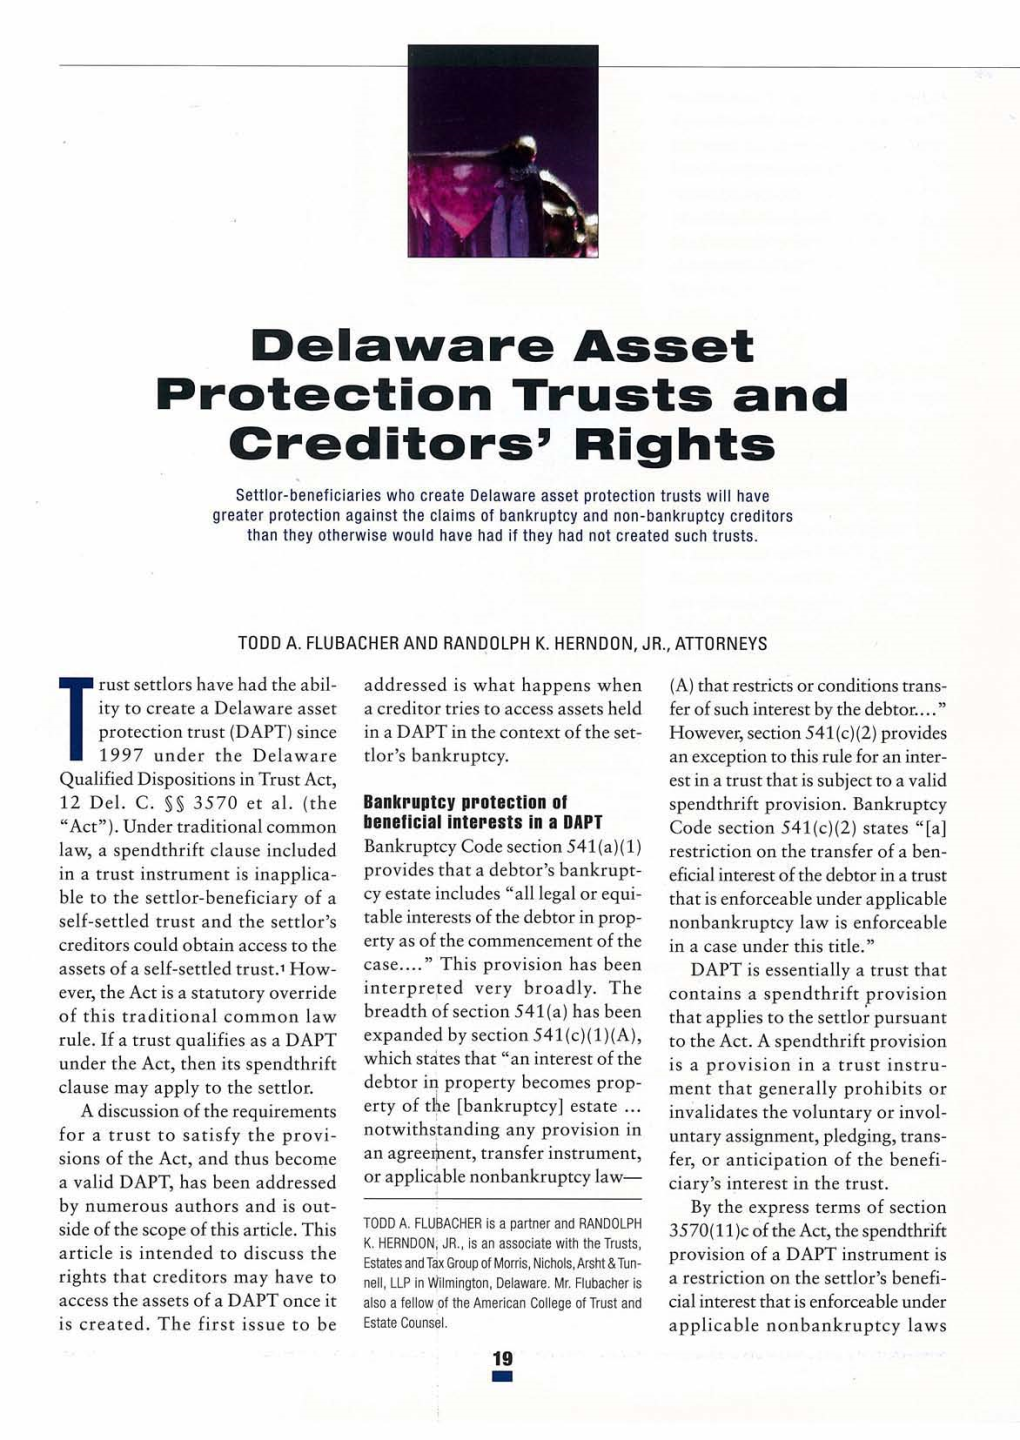 Delaware Asset Protection Trusts and Creditors' Rights